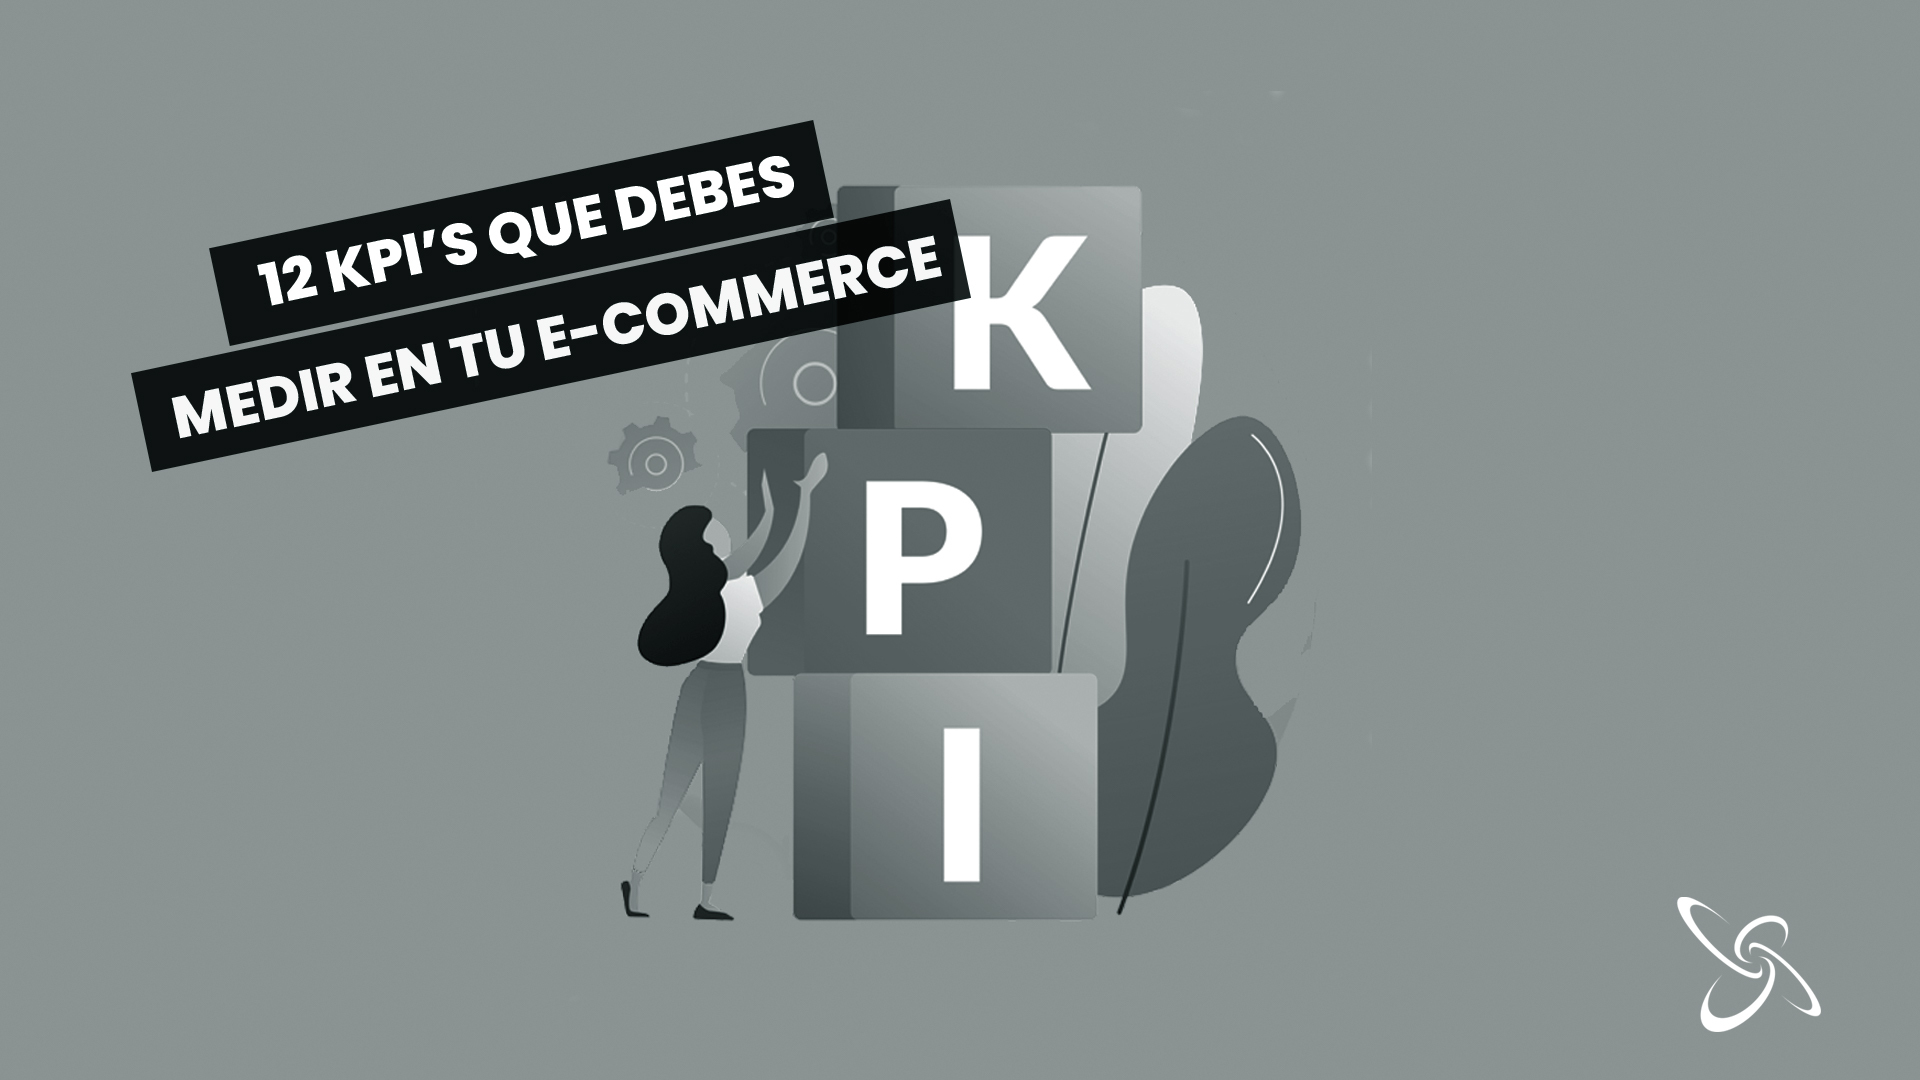 12 KPI’s that you should measure in your e-commerce